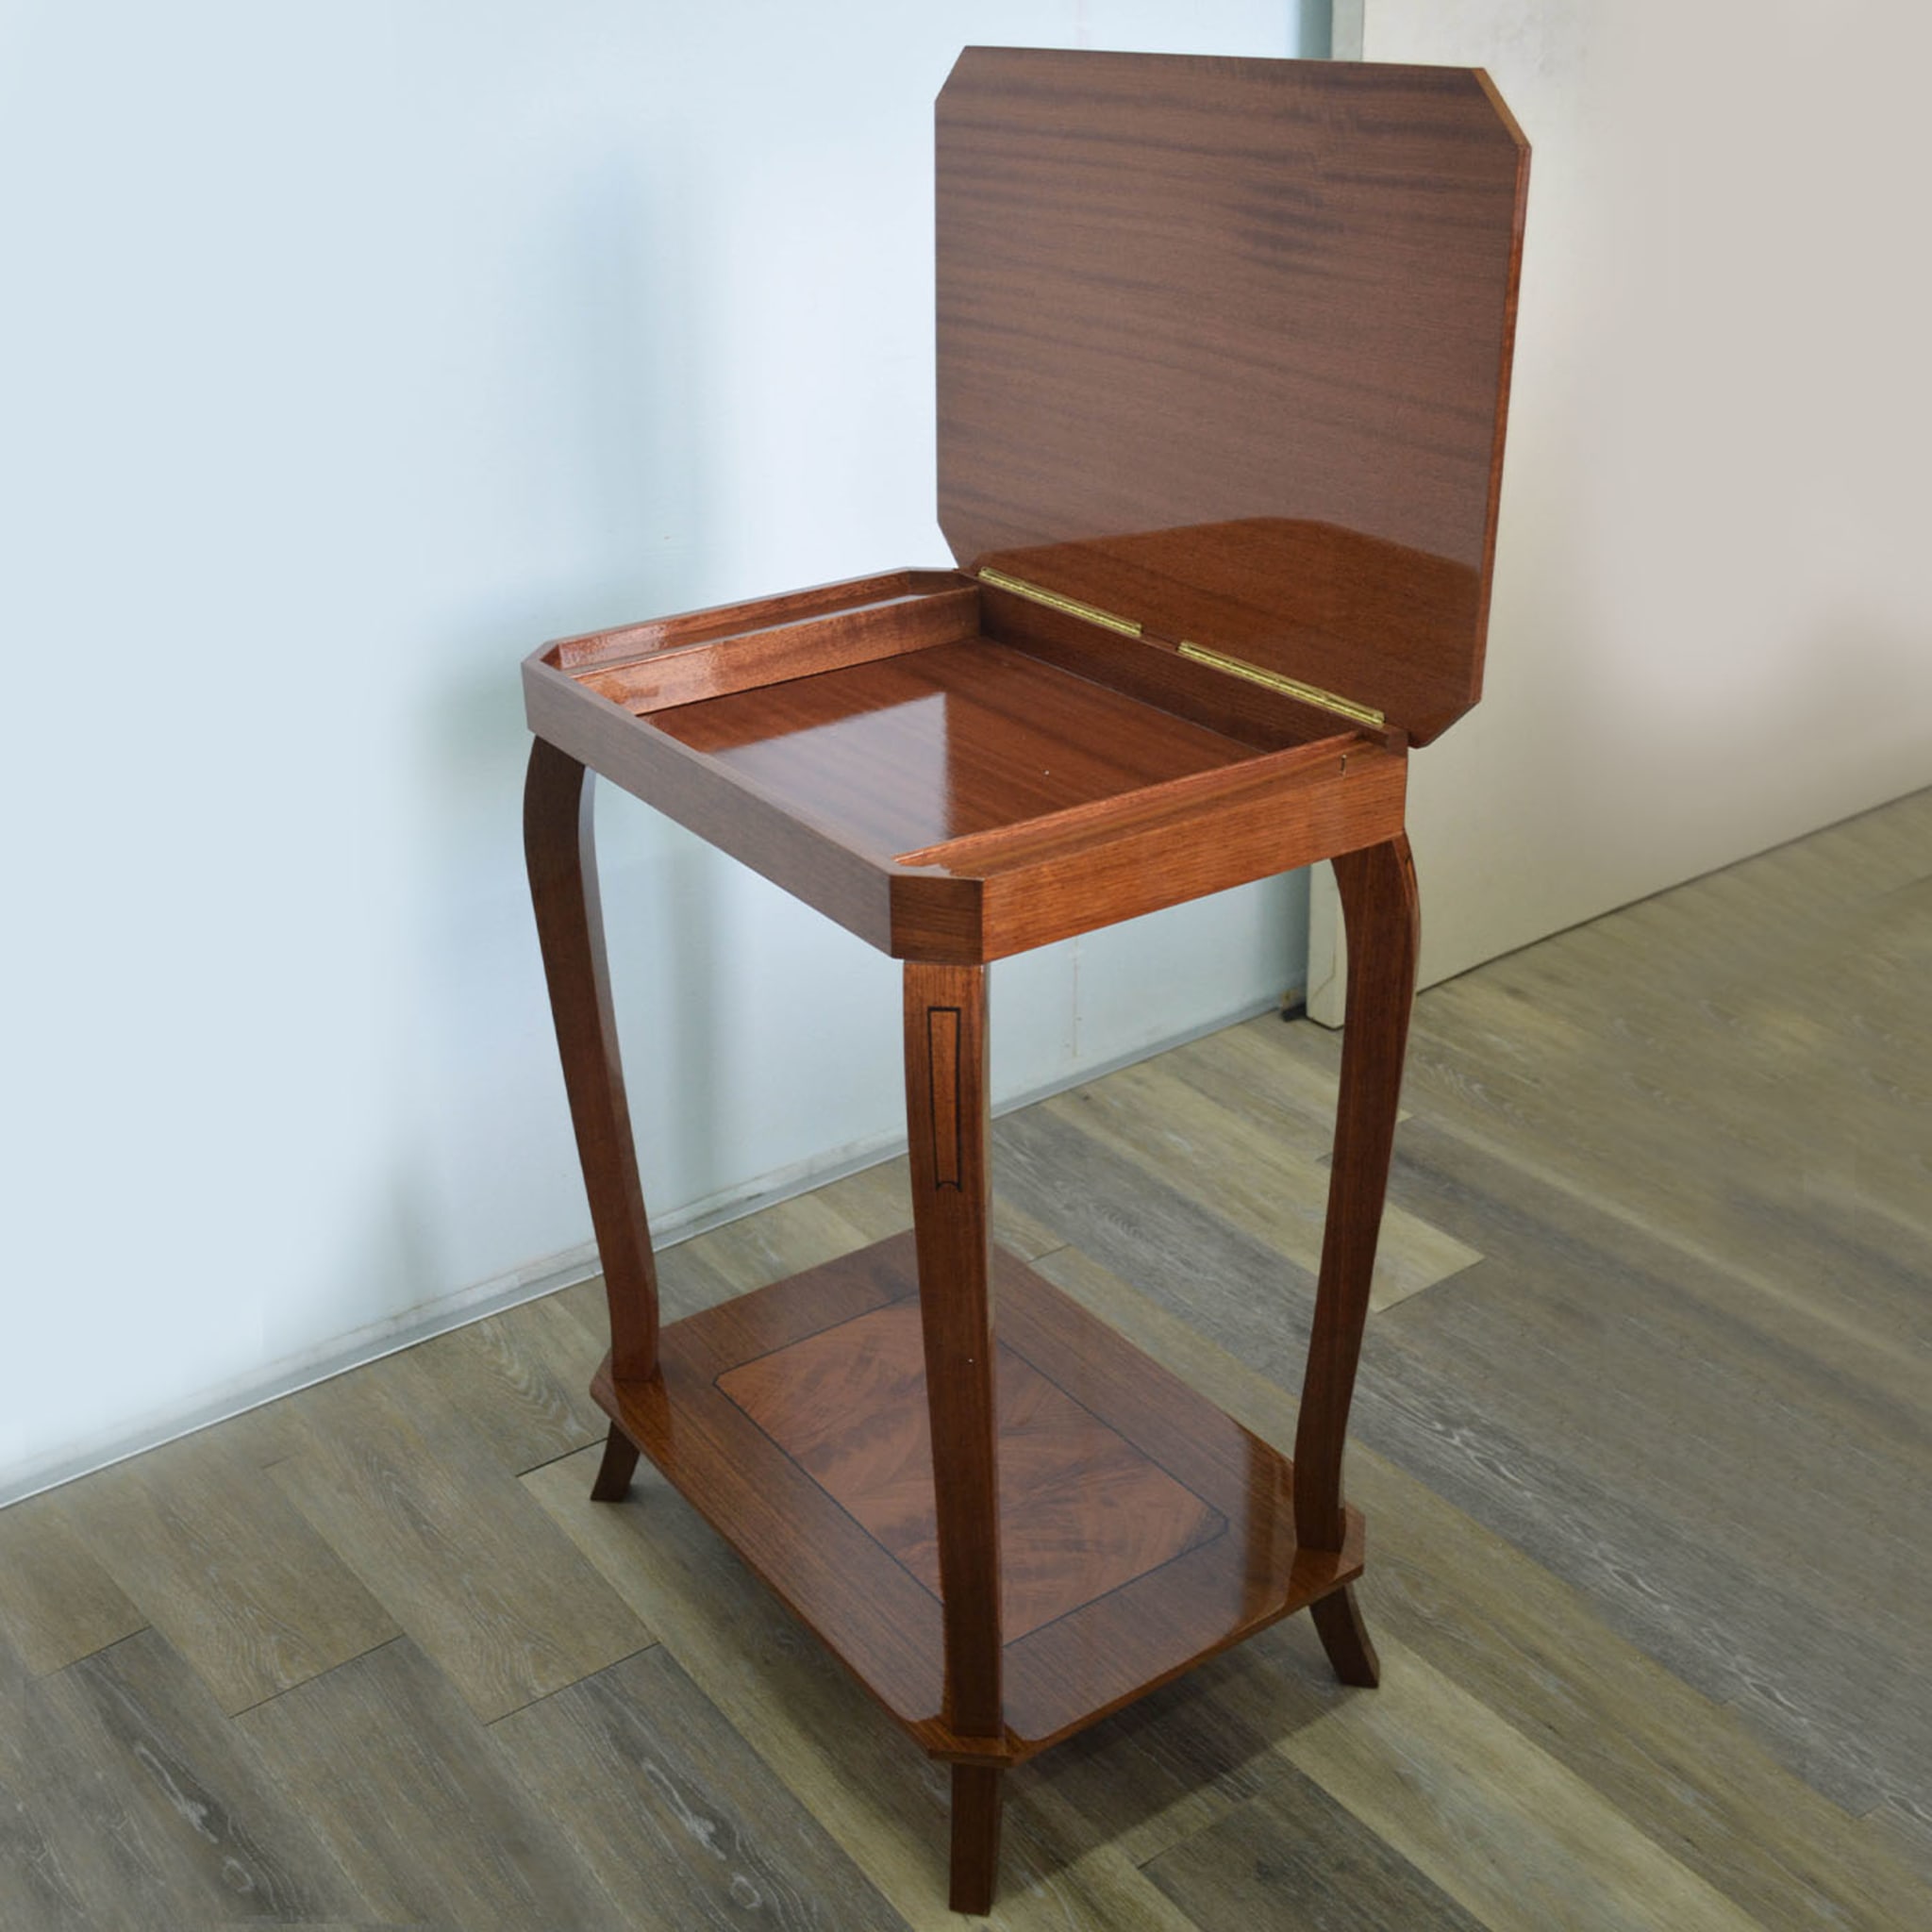 Musical Walnut Side Table with Storage Unit - Alternative view 3